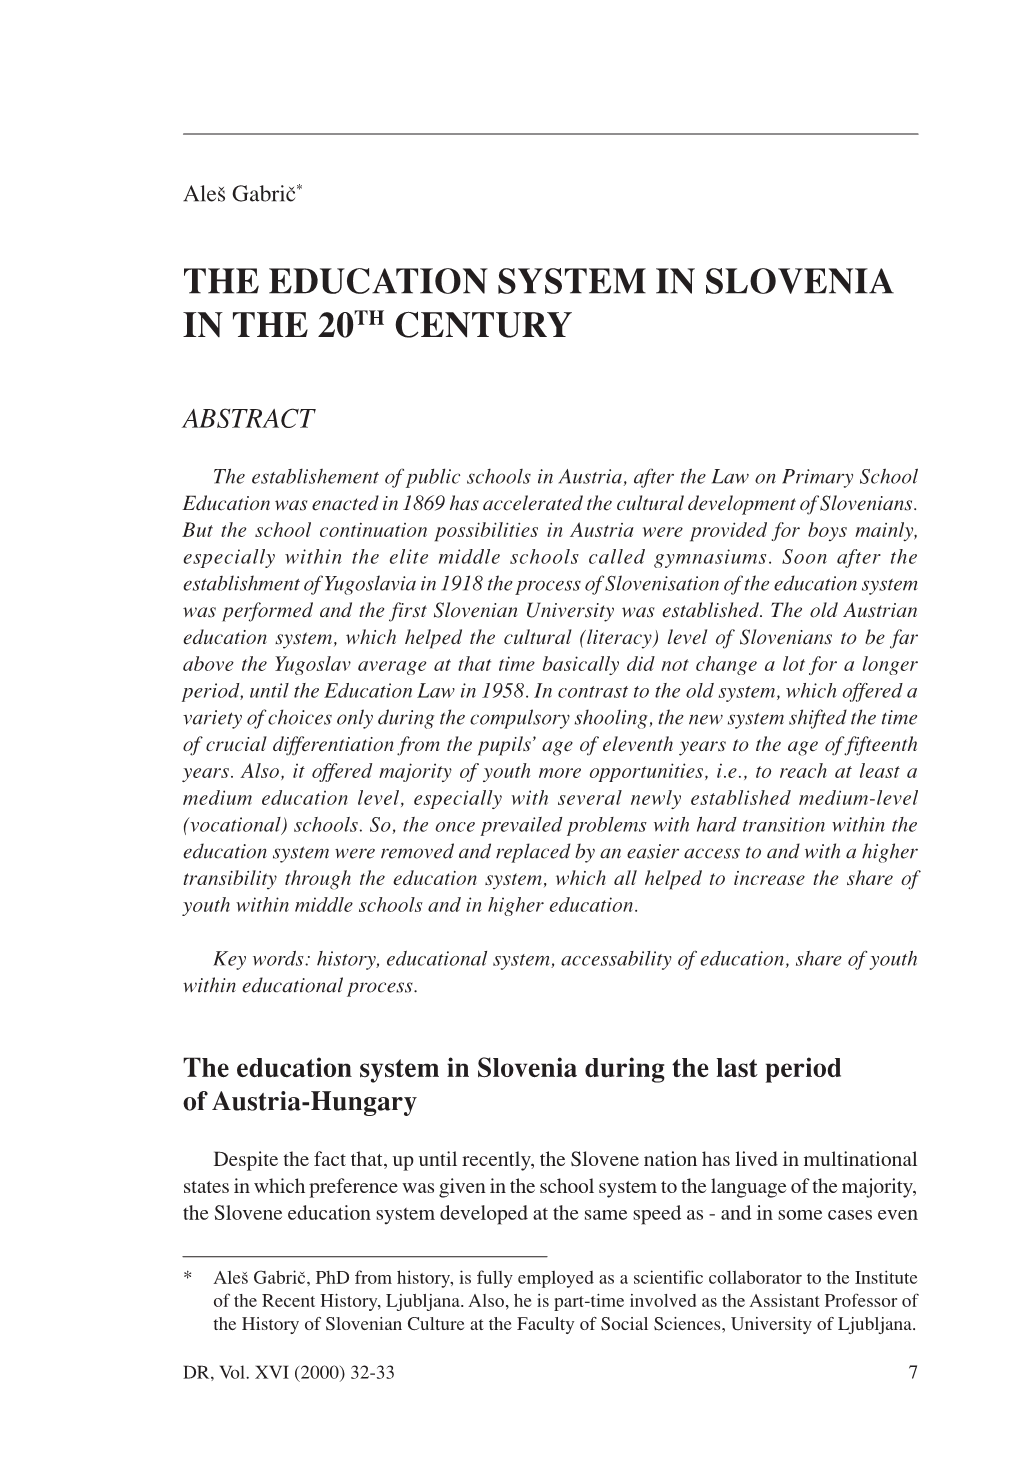 The Education System in Slovenia in the 20Th Century